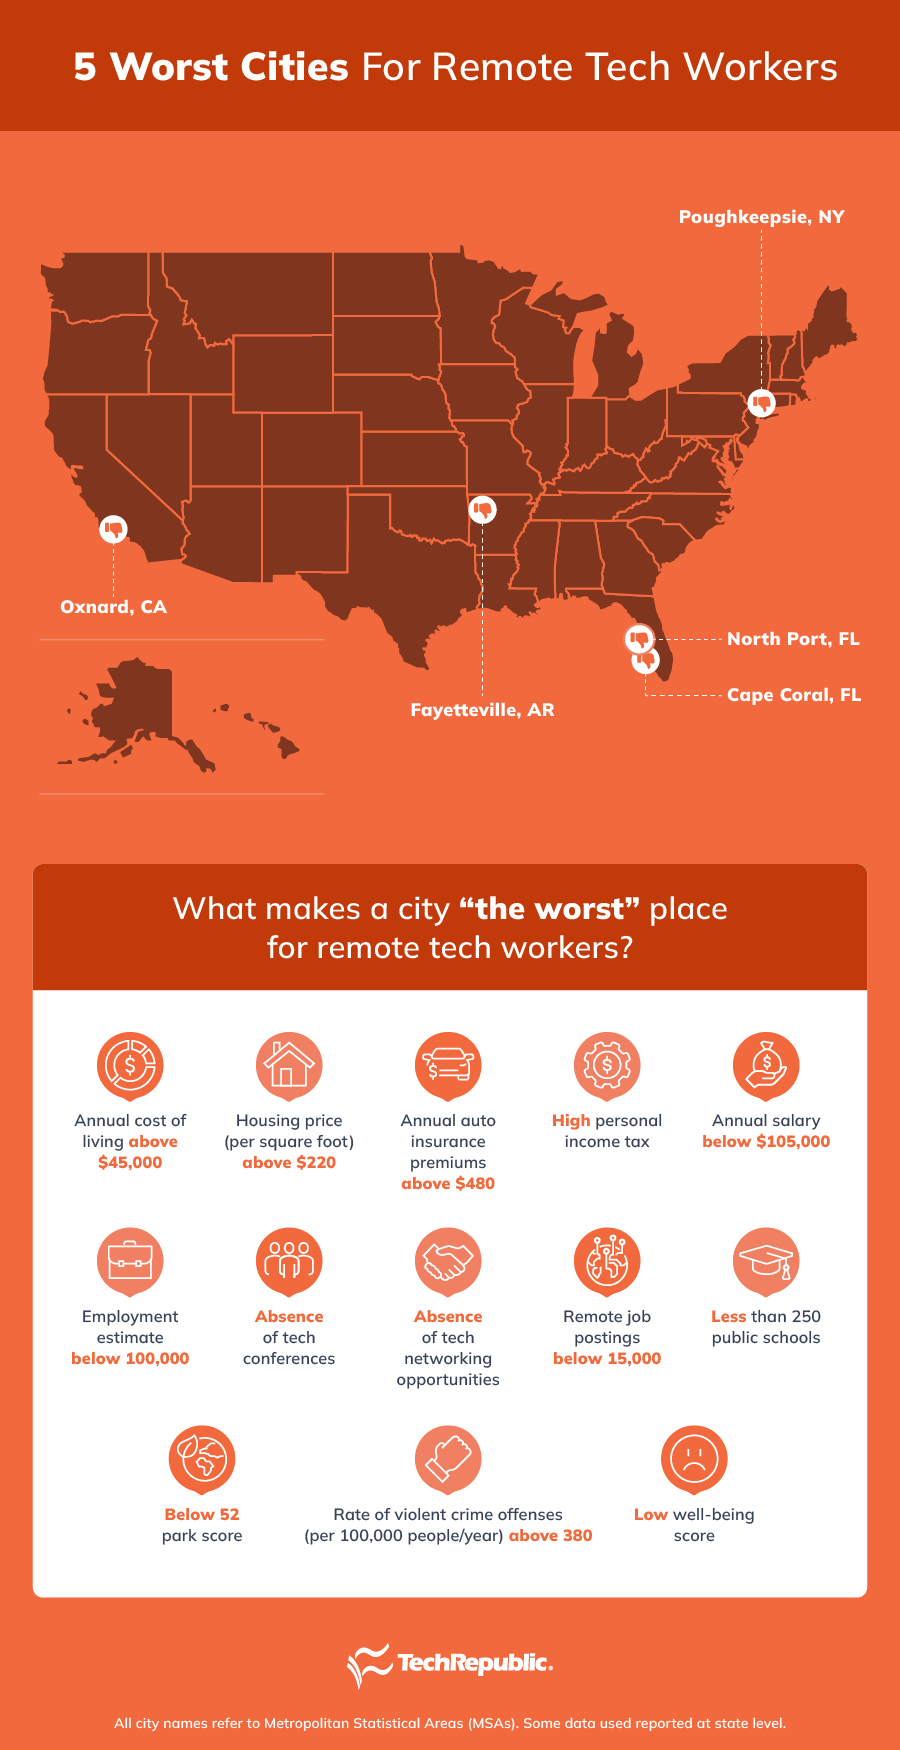 A U.S. map showing the five worst cities for remote tech workers and the criteria on what makes a city the worst place for remote tech workers based on TechRepublic's reporting.